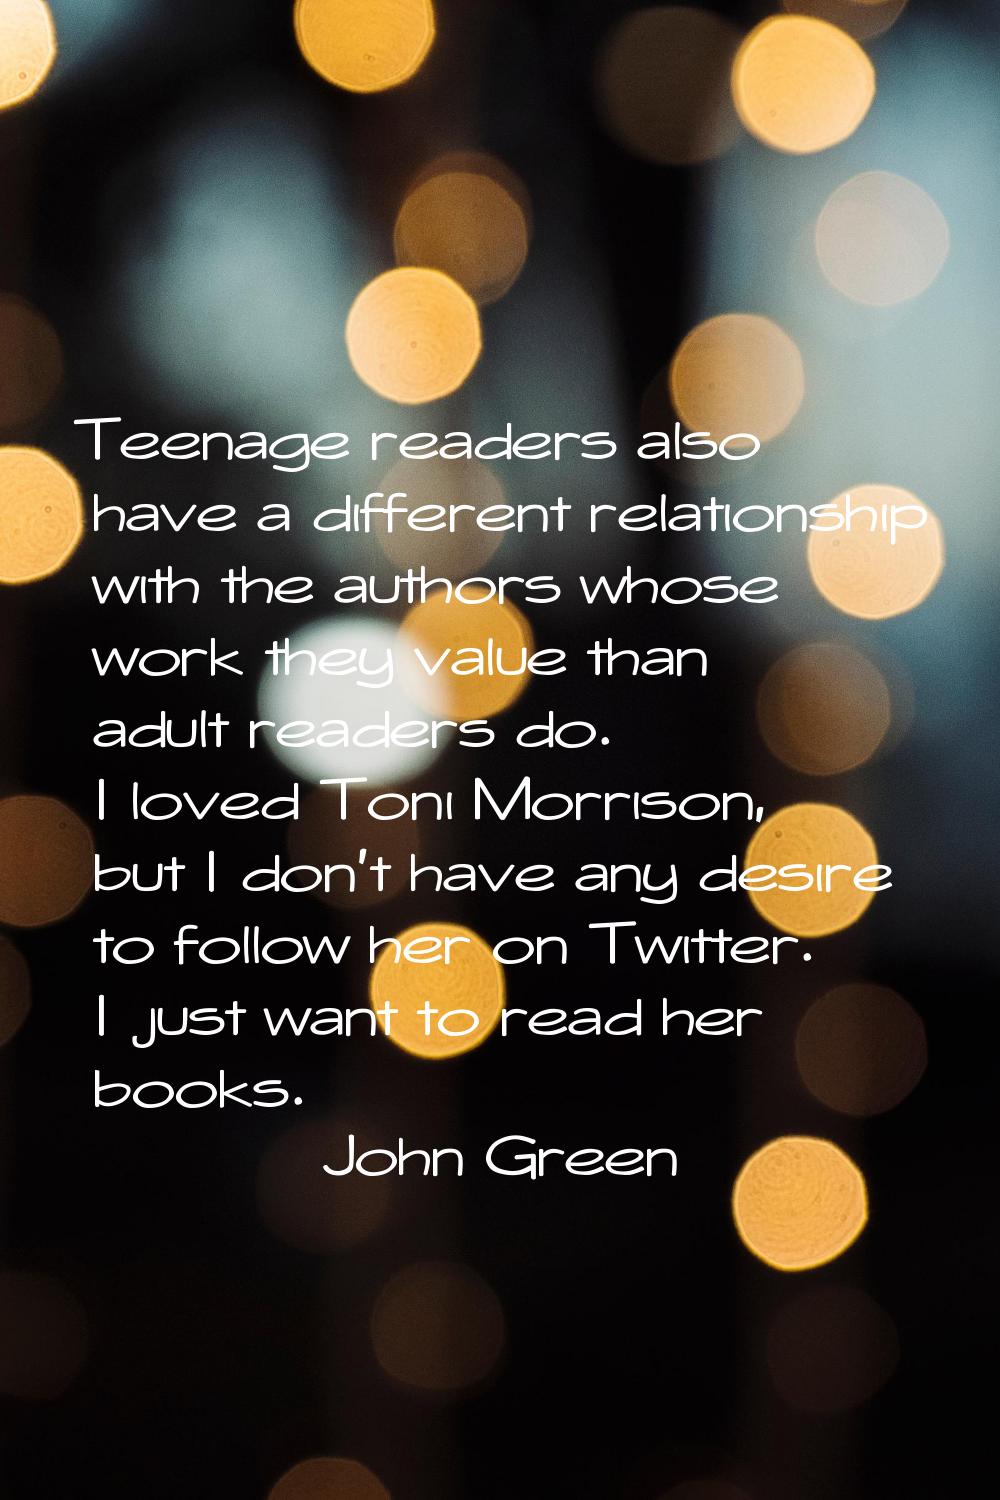 Teenage readers also have a different relationship with the authors whose work they value than adul